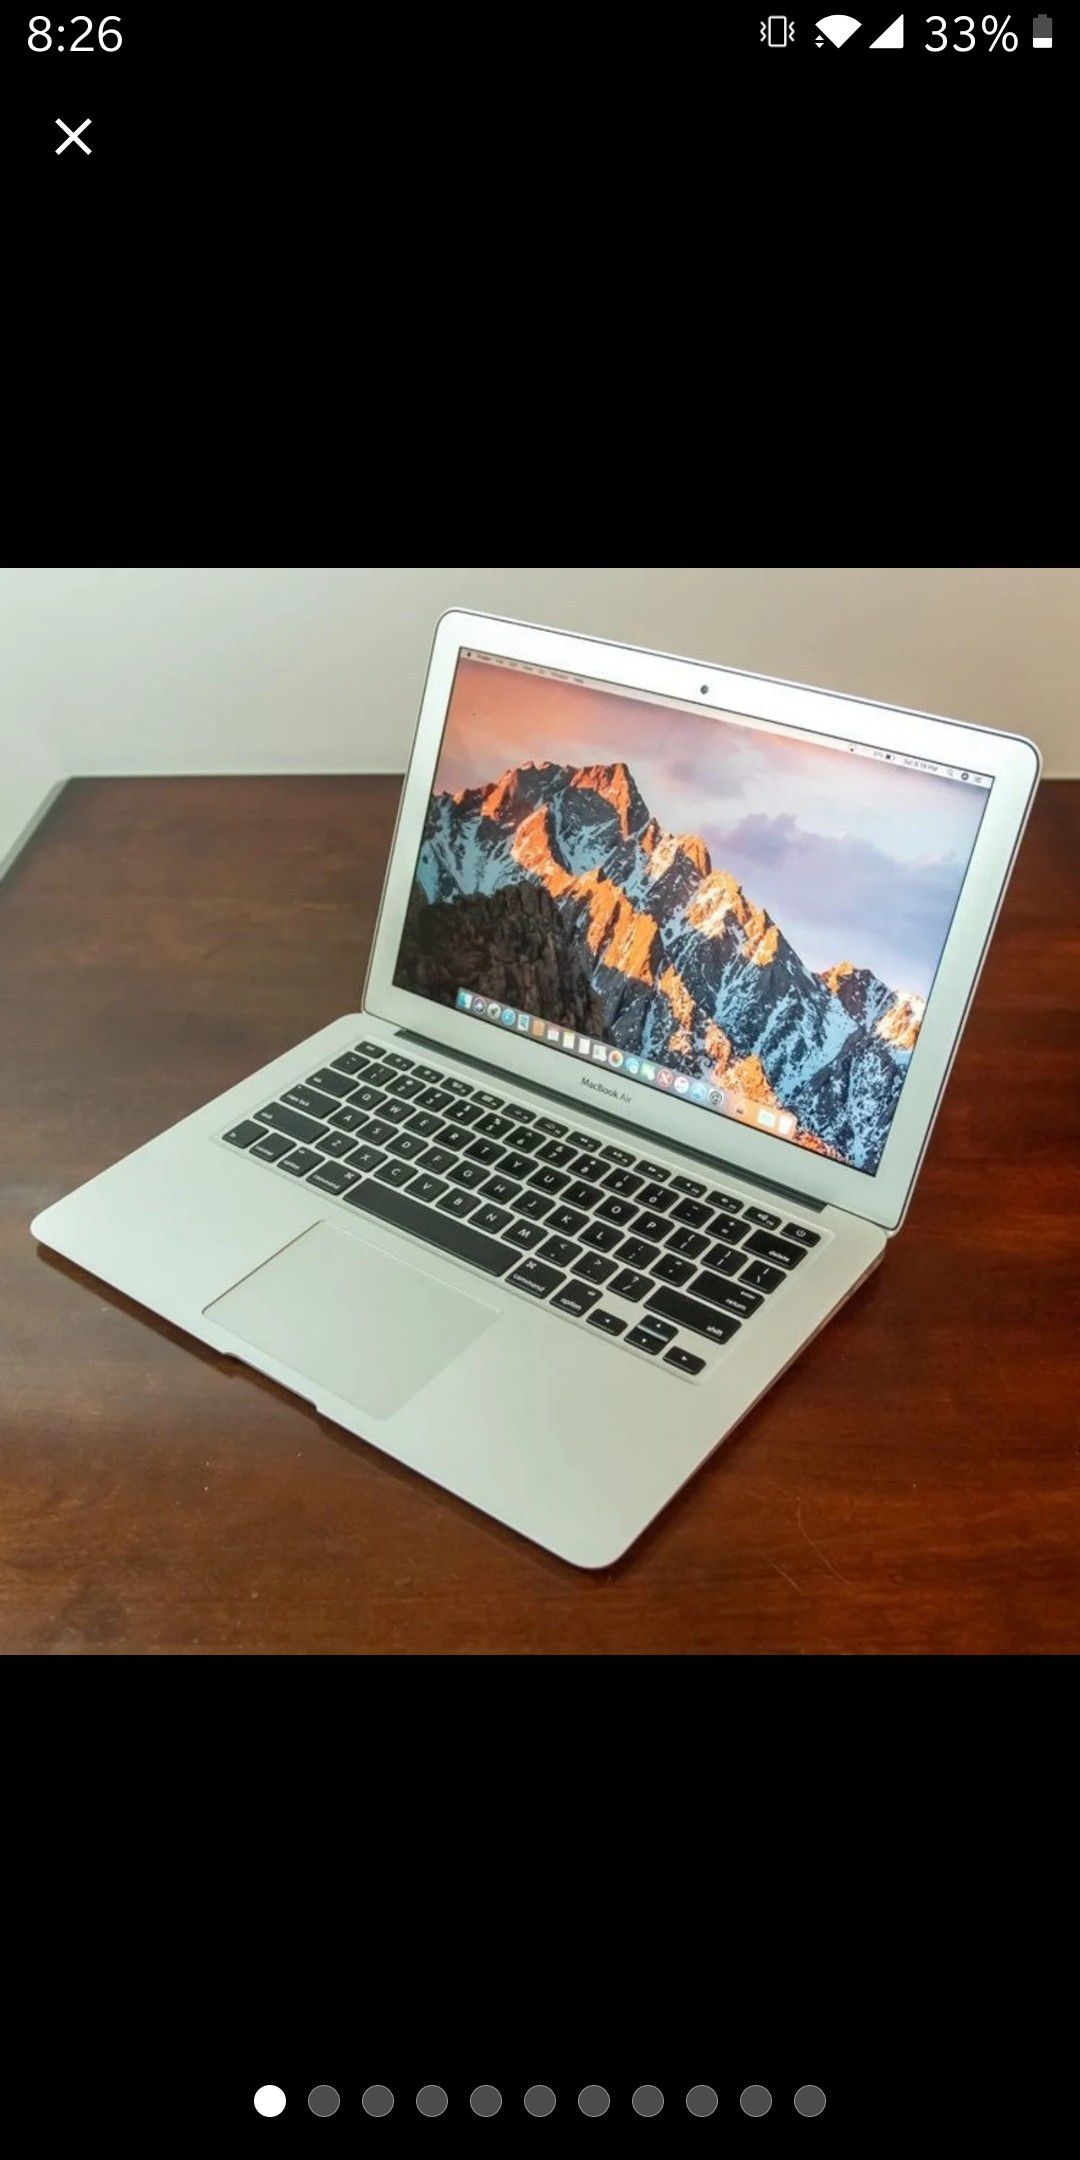 Macbook air 2015 13" i5 256gb ssd 8gb ram mint condition brand new battery